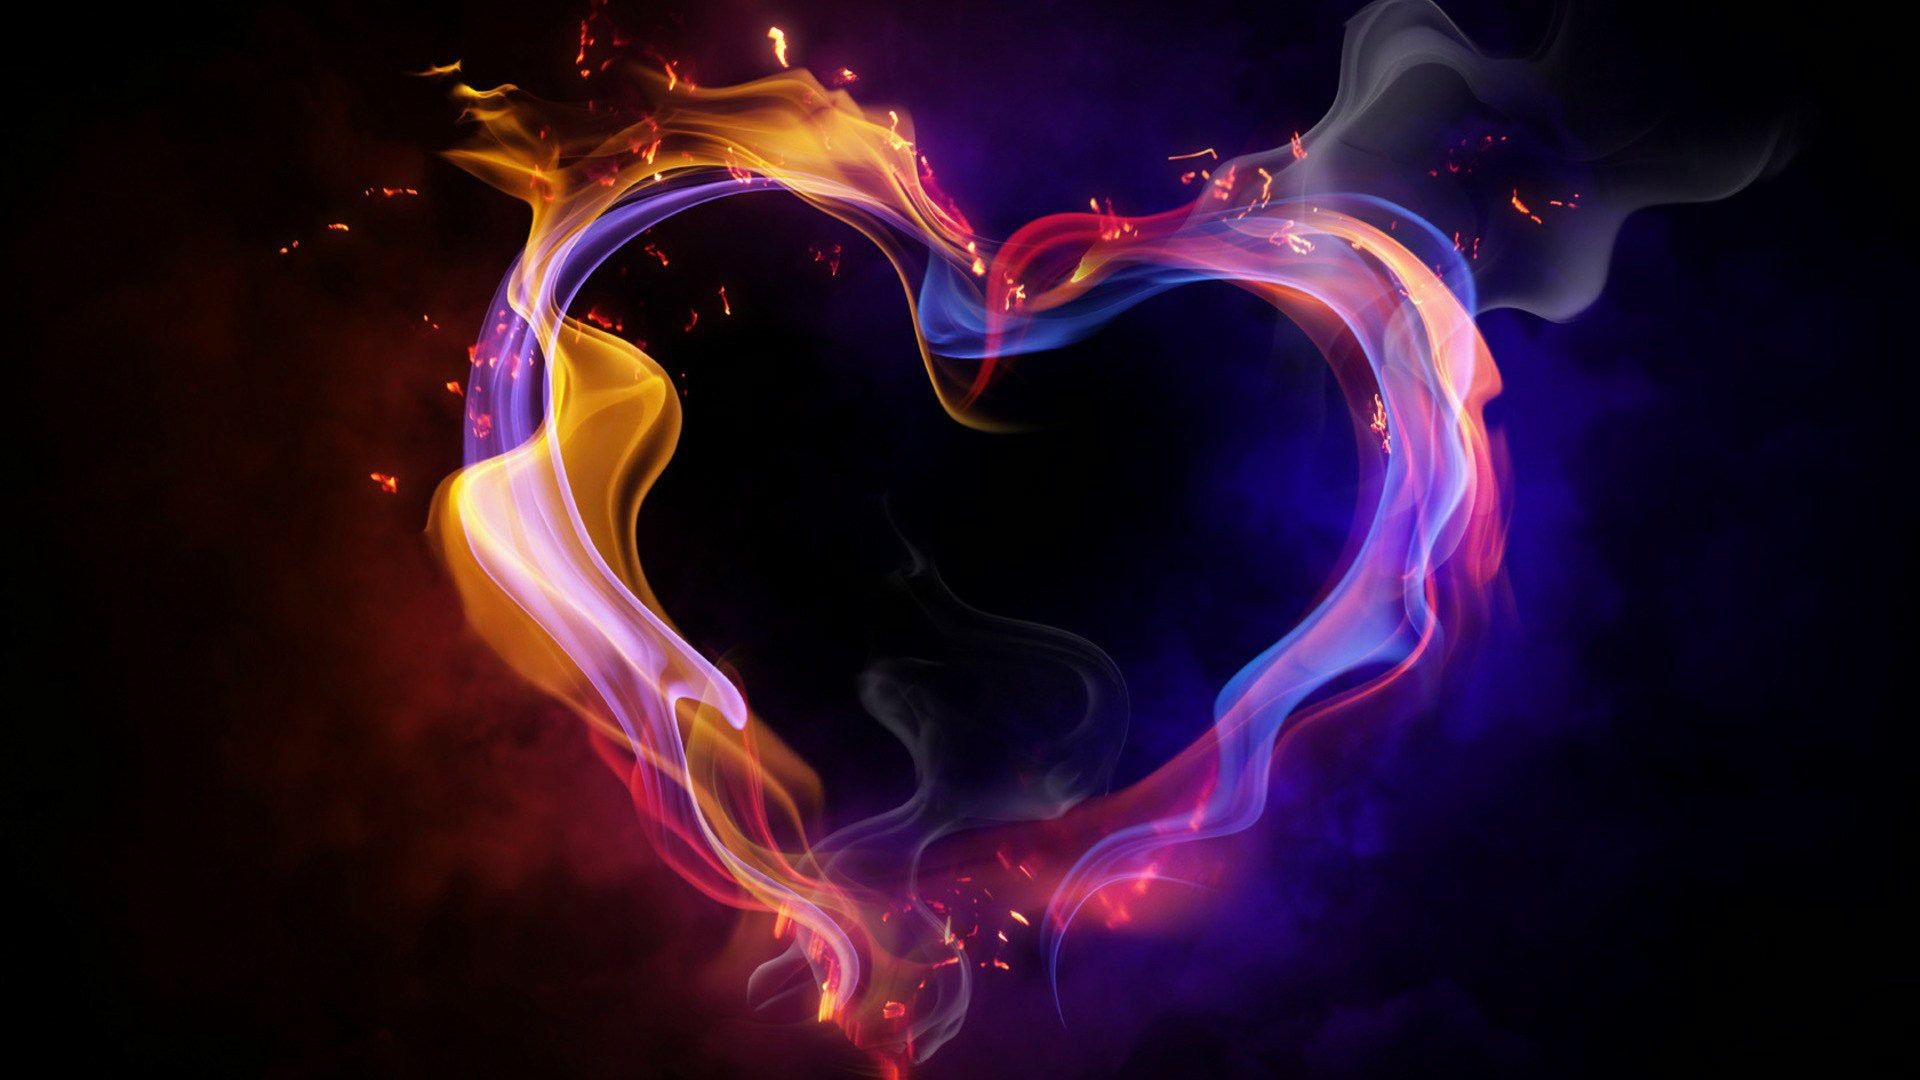 1920x1080 Cool love abstract hd images